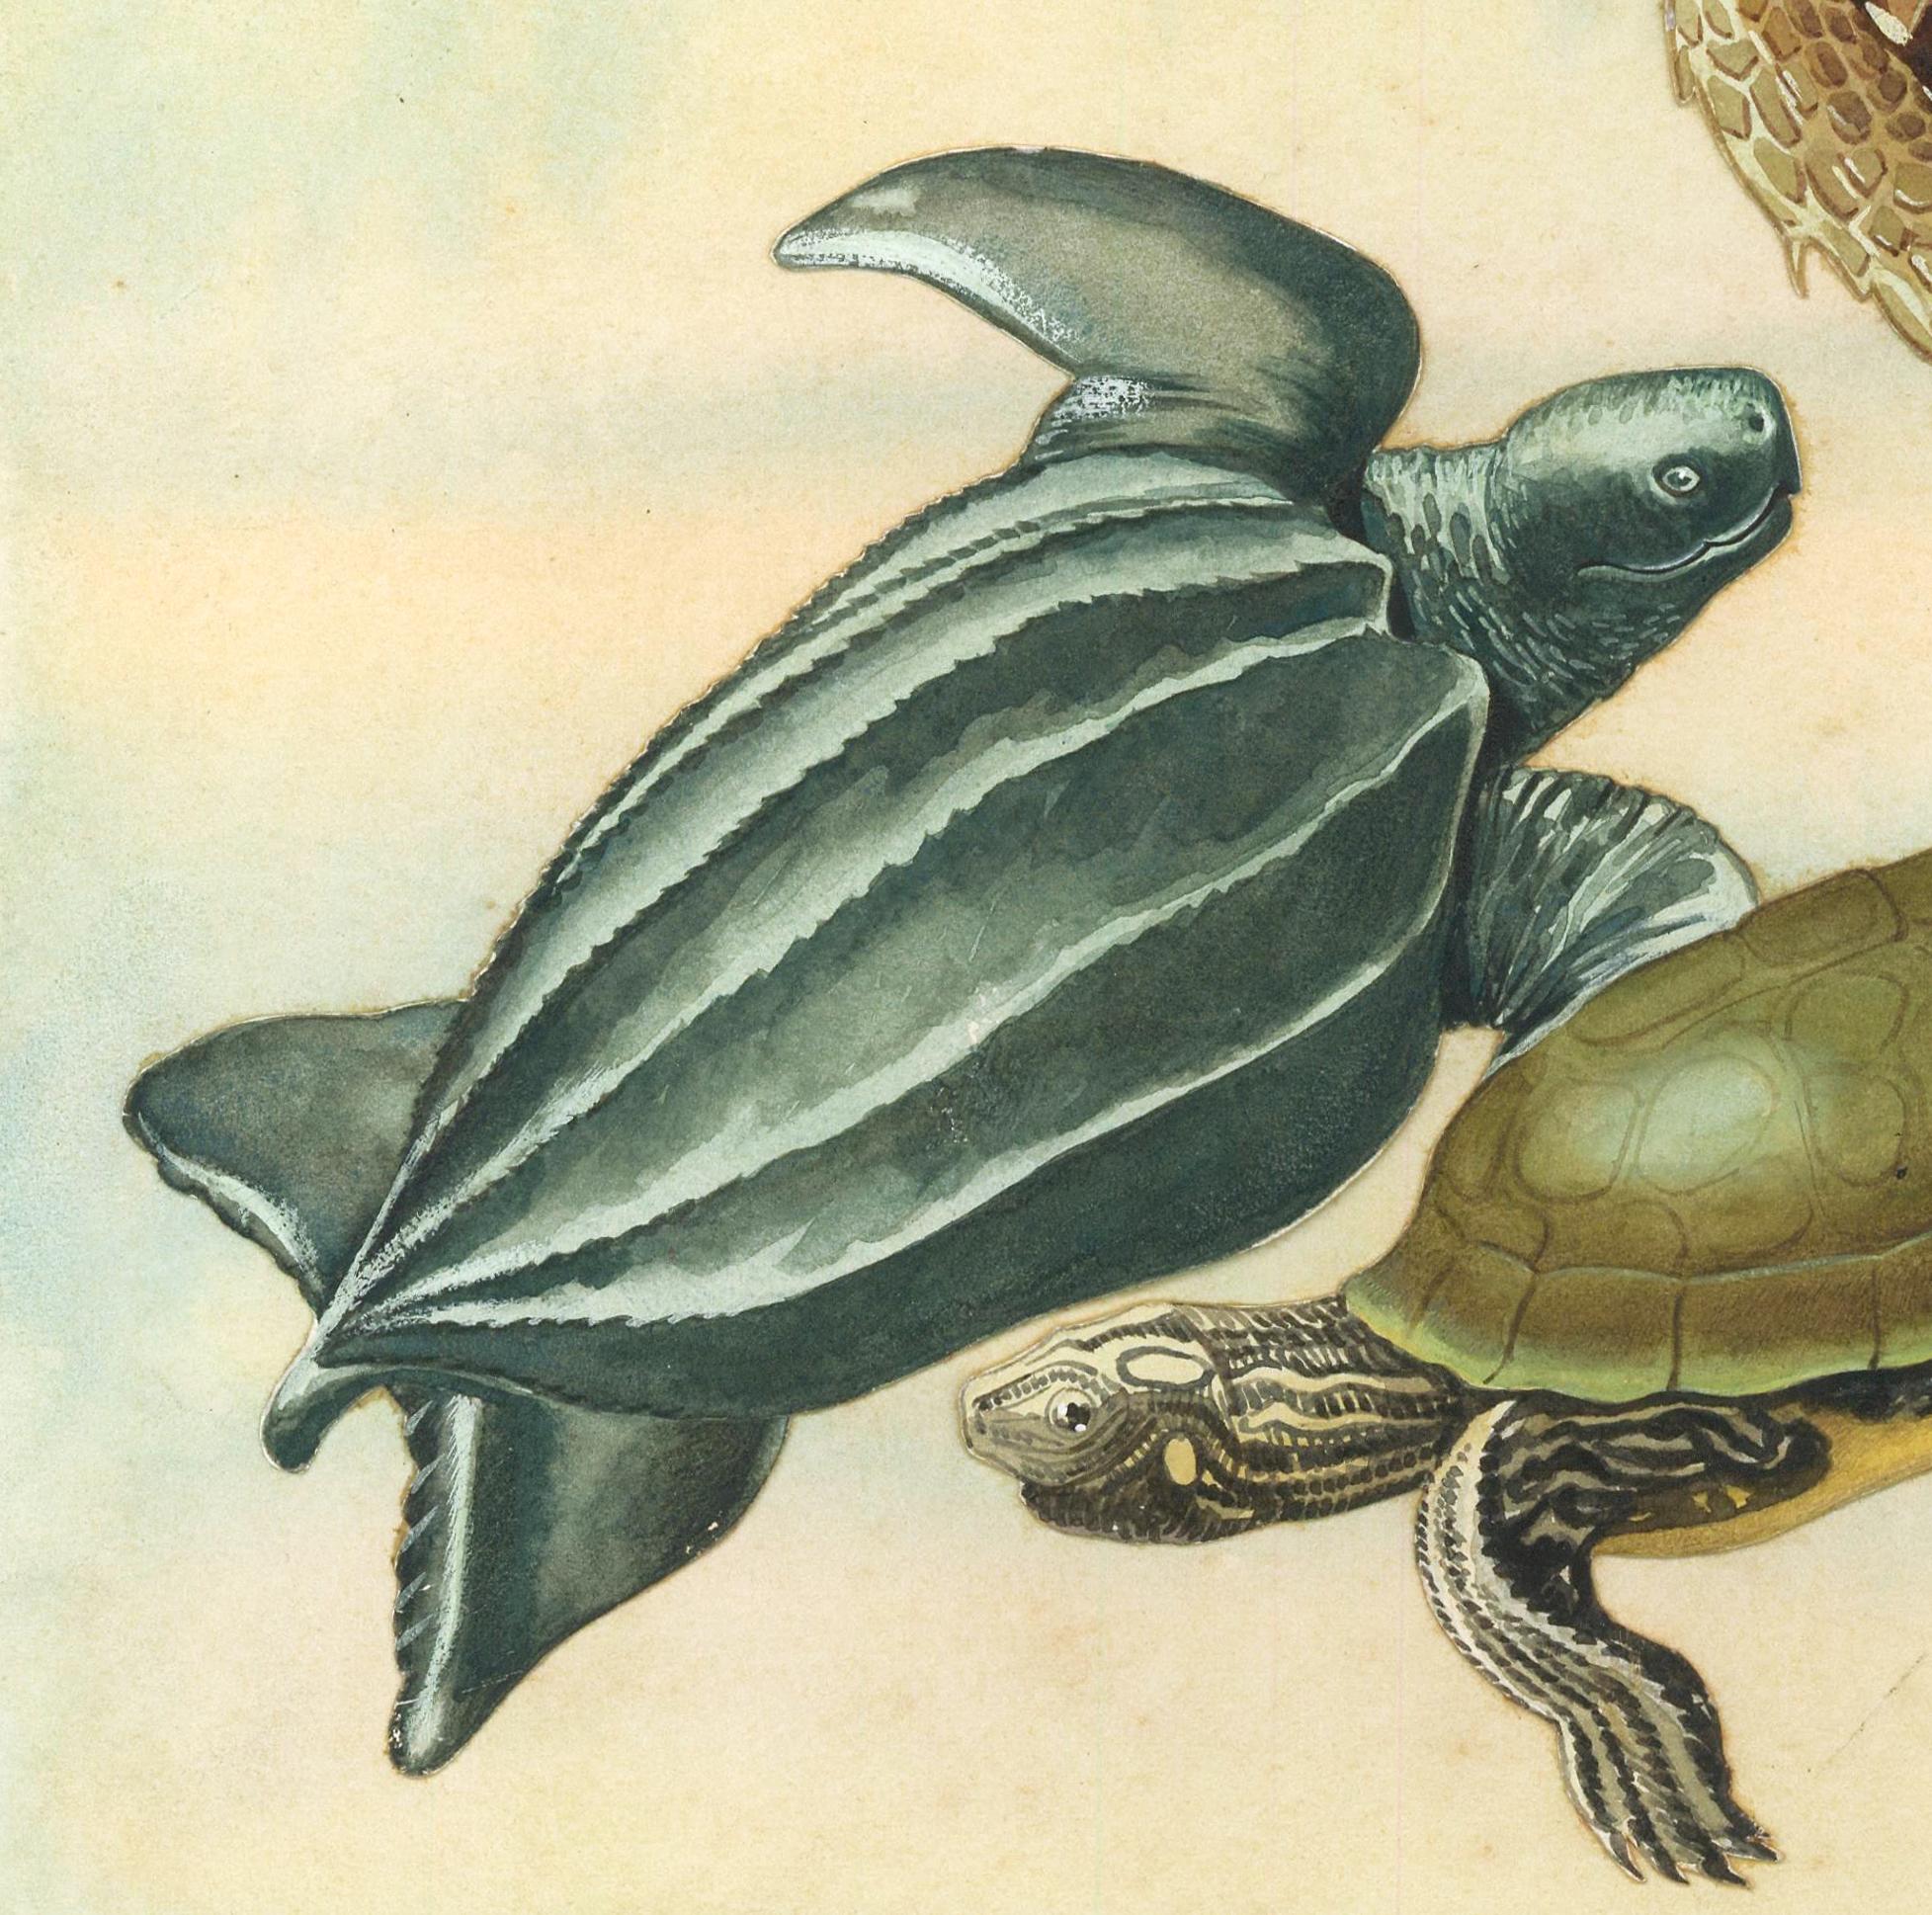 Gopher Tortoise, Hawksbill, Loggerhead, Leatherback and Map Turtles. - Painting by Unknown